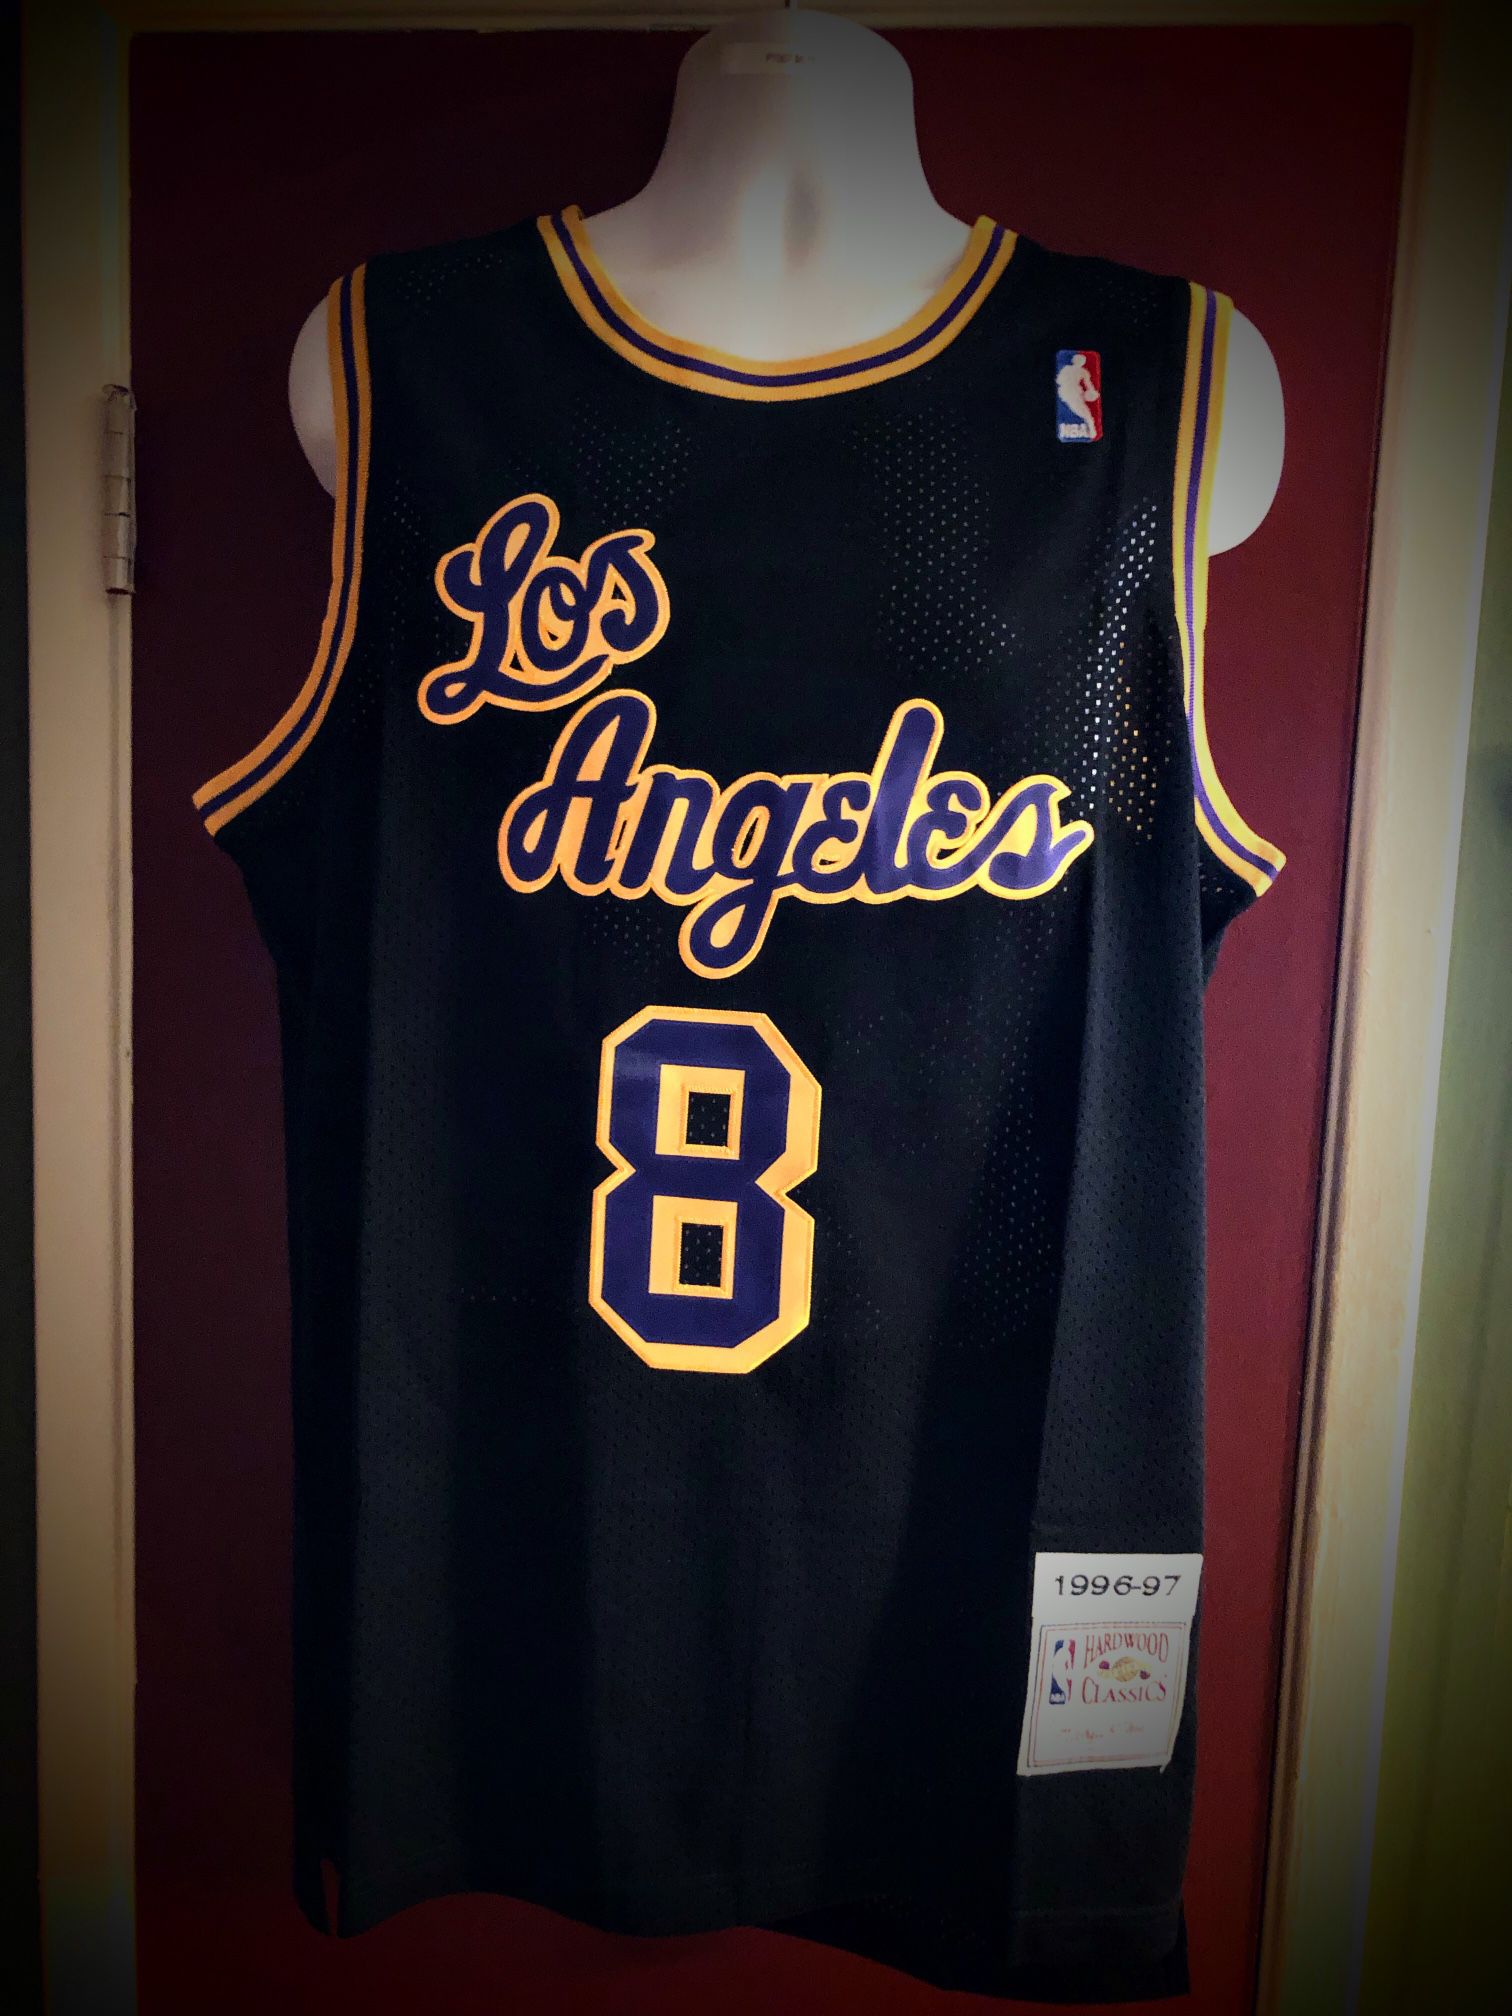 Los Angeles Lakers #8 Kobe Bryant NBA Basketball Jersey -S.M.L.XL.2X for  Sale in Long Beach, CA - OfferUp